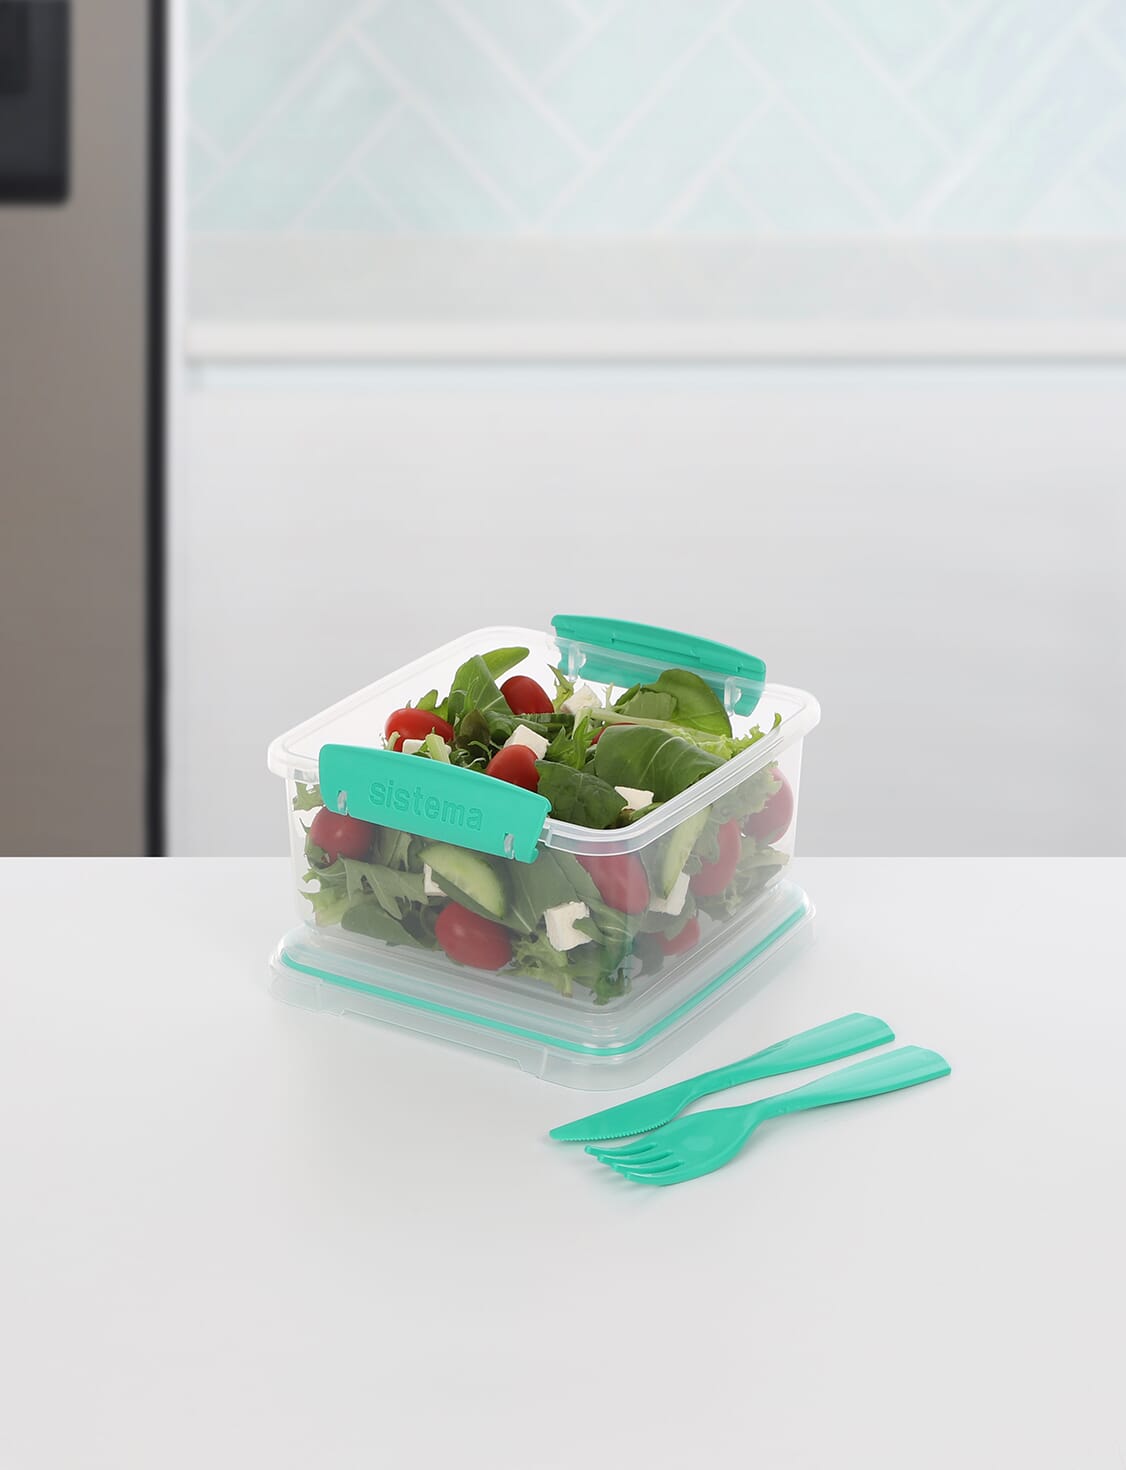 1.2L Lunch Plus TO GO™ with Cutlery-Minty Teal